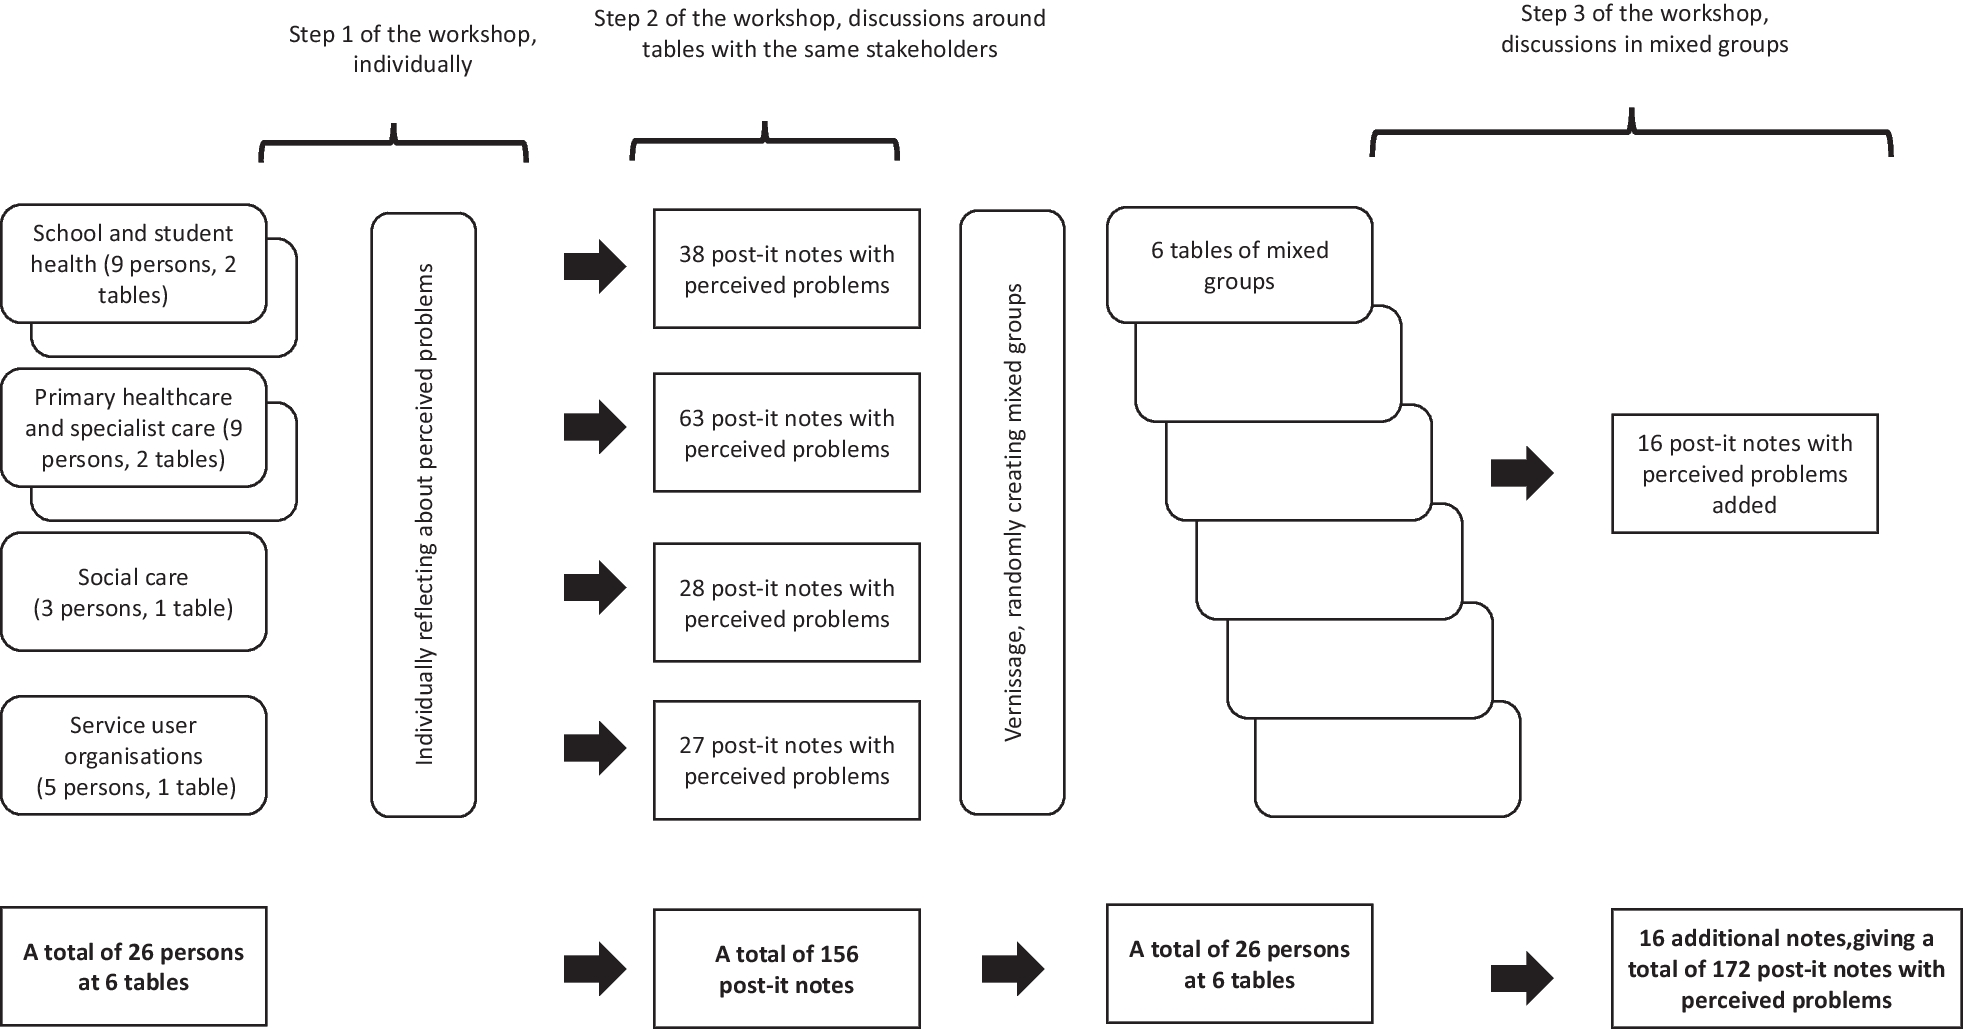 Exploring stakeholders’ perceived problems associated with the care and support of children and youth with mental ill health in Sweden: a qualitative study